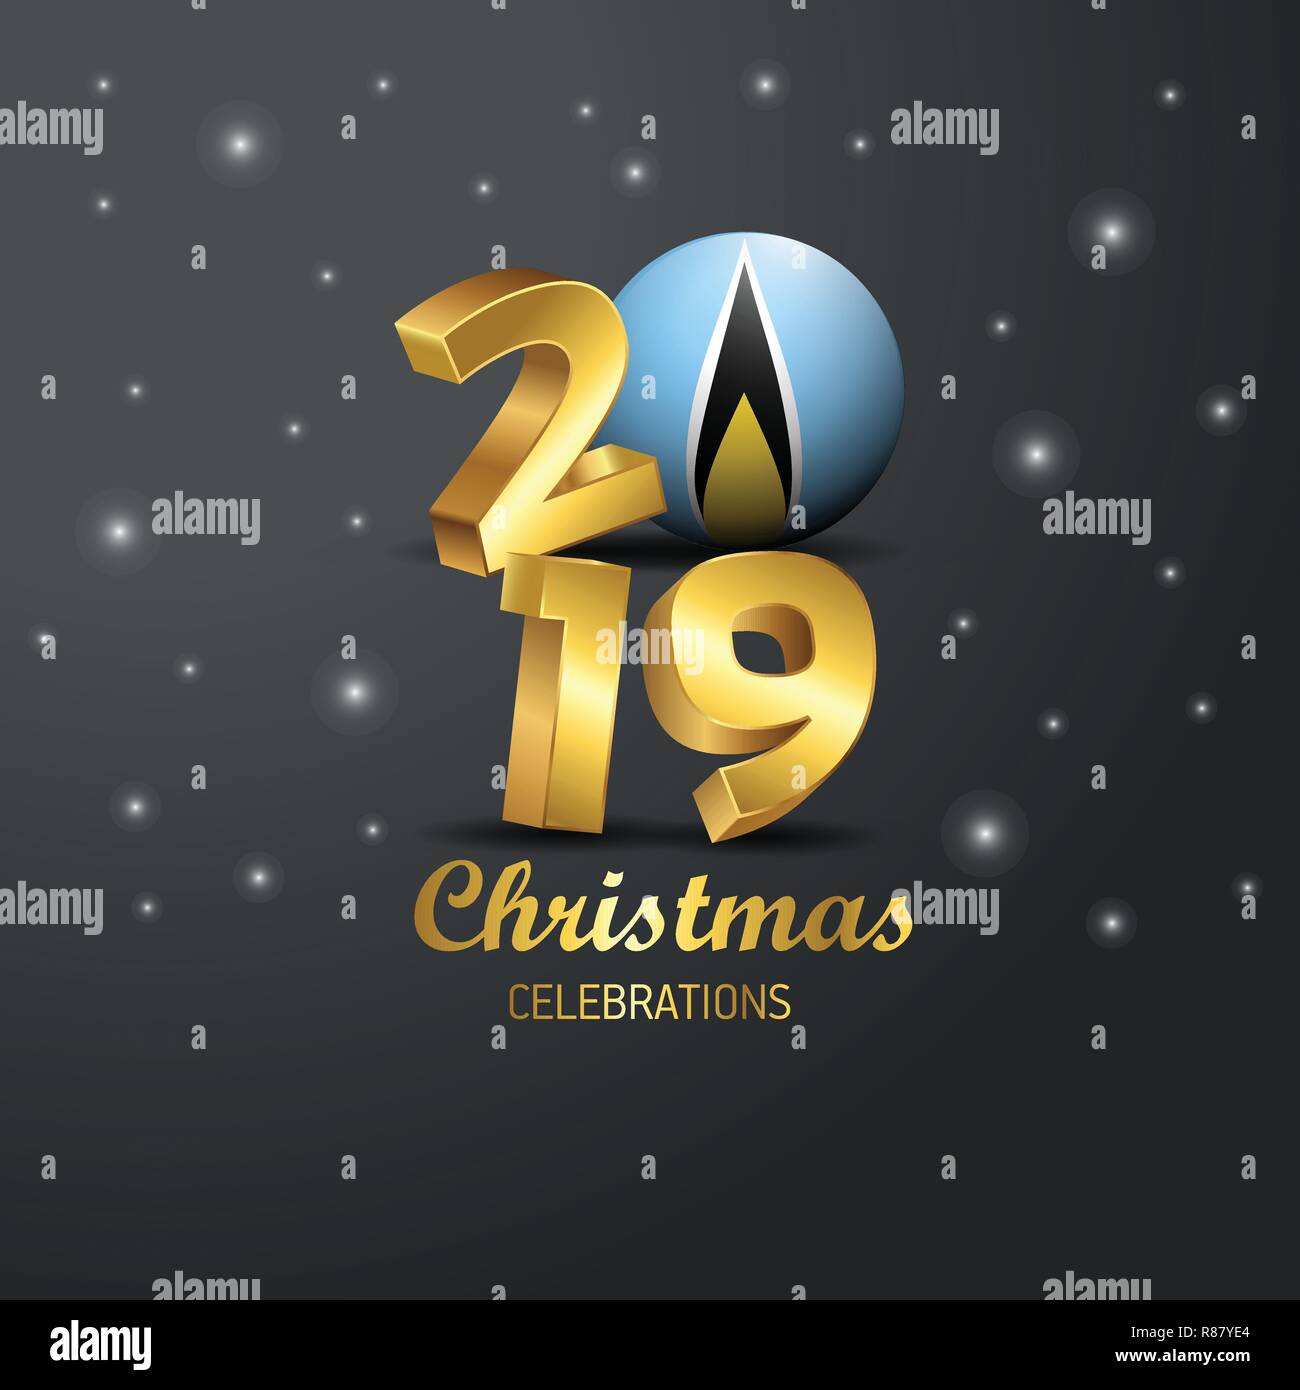 Saint Lucia Flag 2019 Merry Christmas Typography. New Year Abstract Celebration background Stock Vector